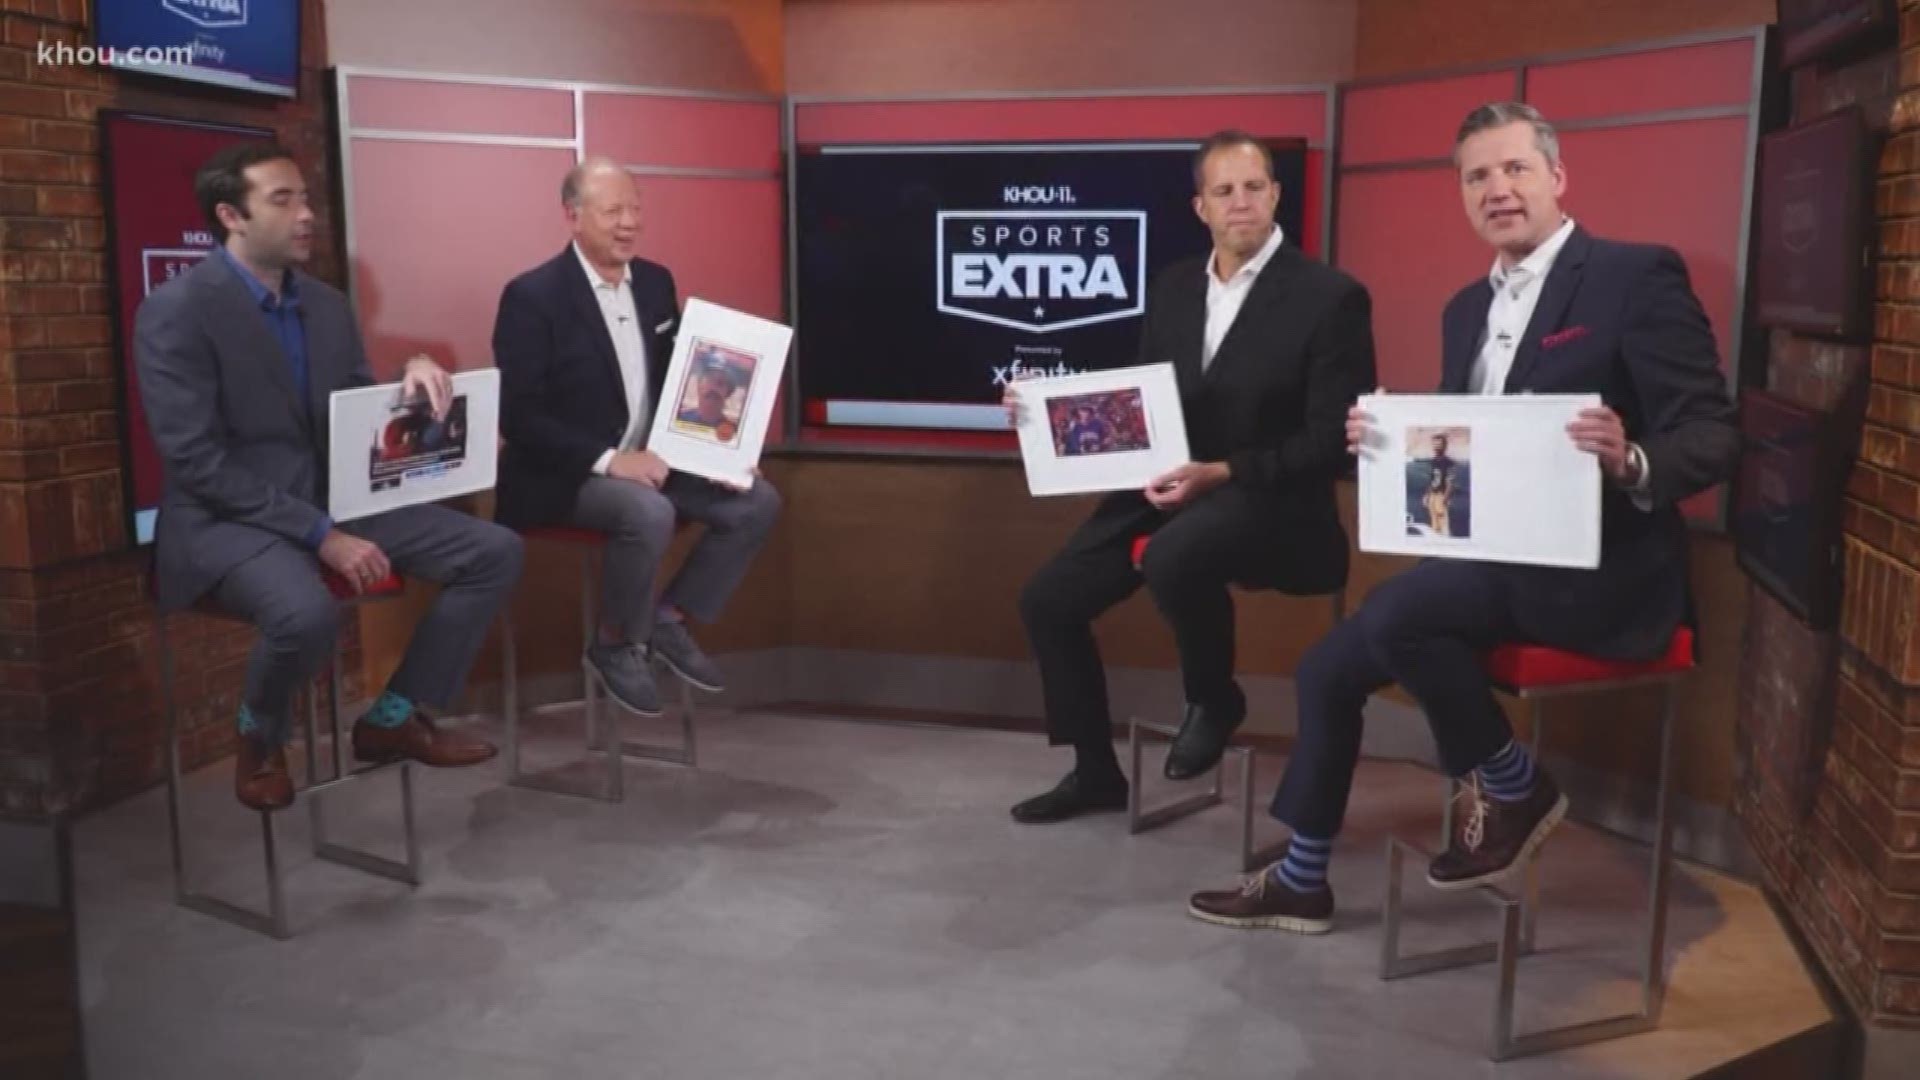 Jaguars quarterback Gardner Minshew has an epic mustache, which got us wondering: Who has the best mustache in Houston sports history? Our Sports Extra crew gives their take.